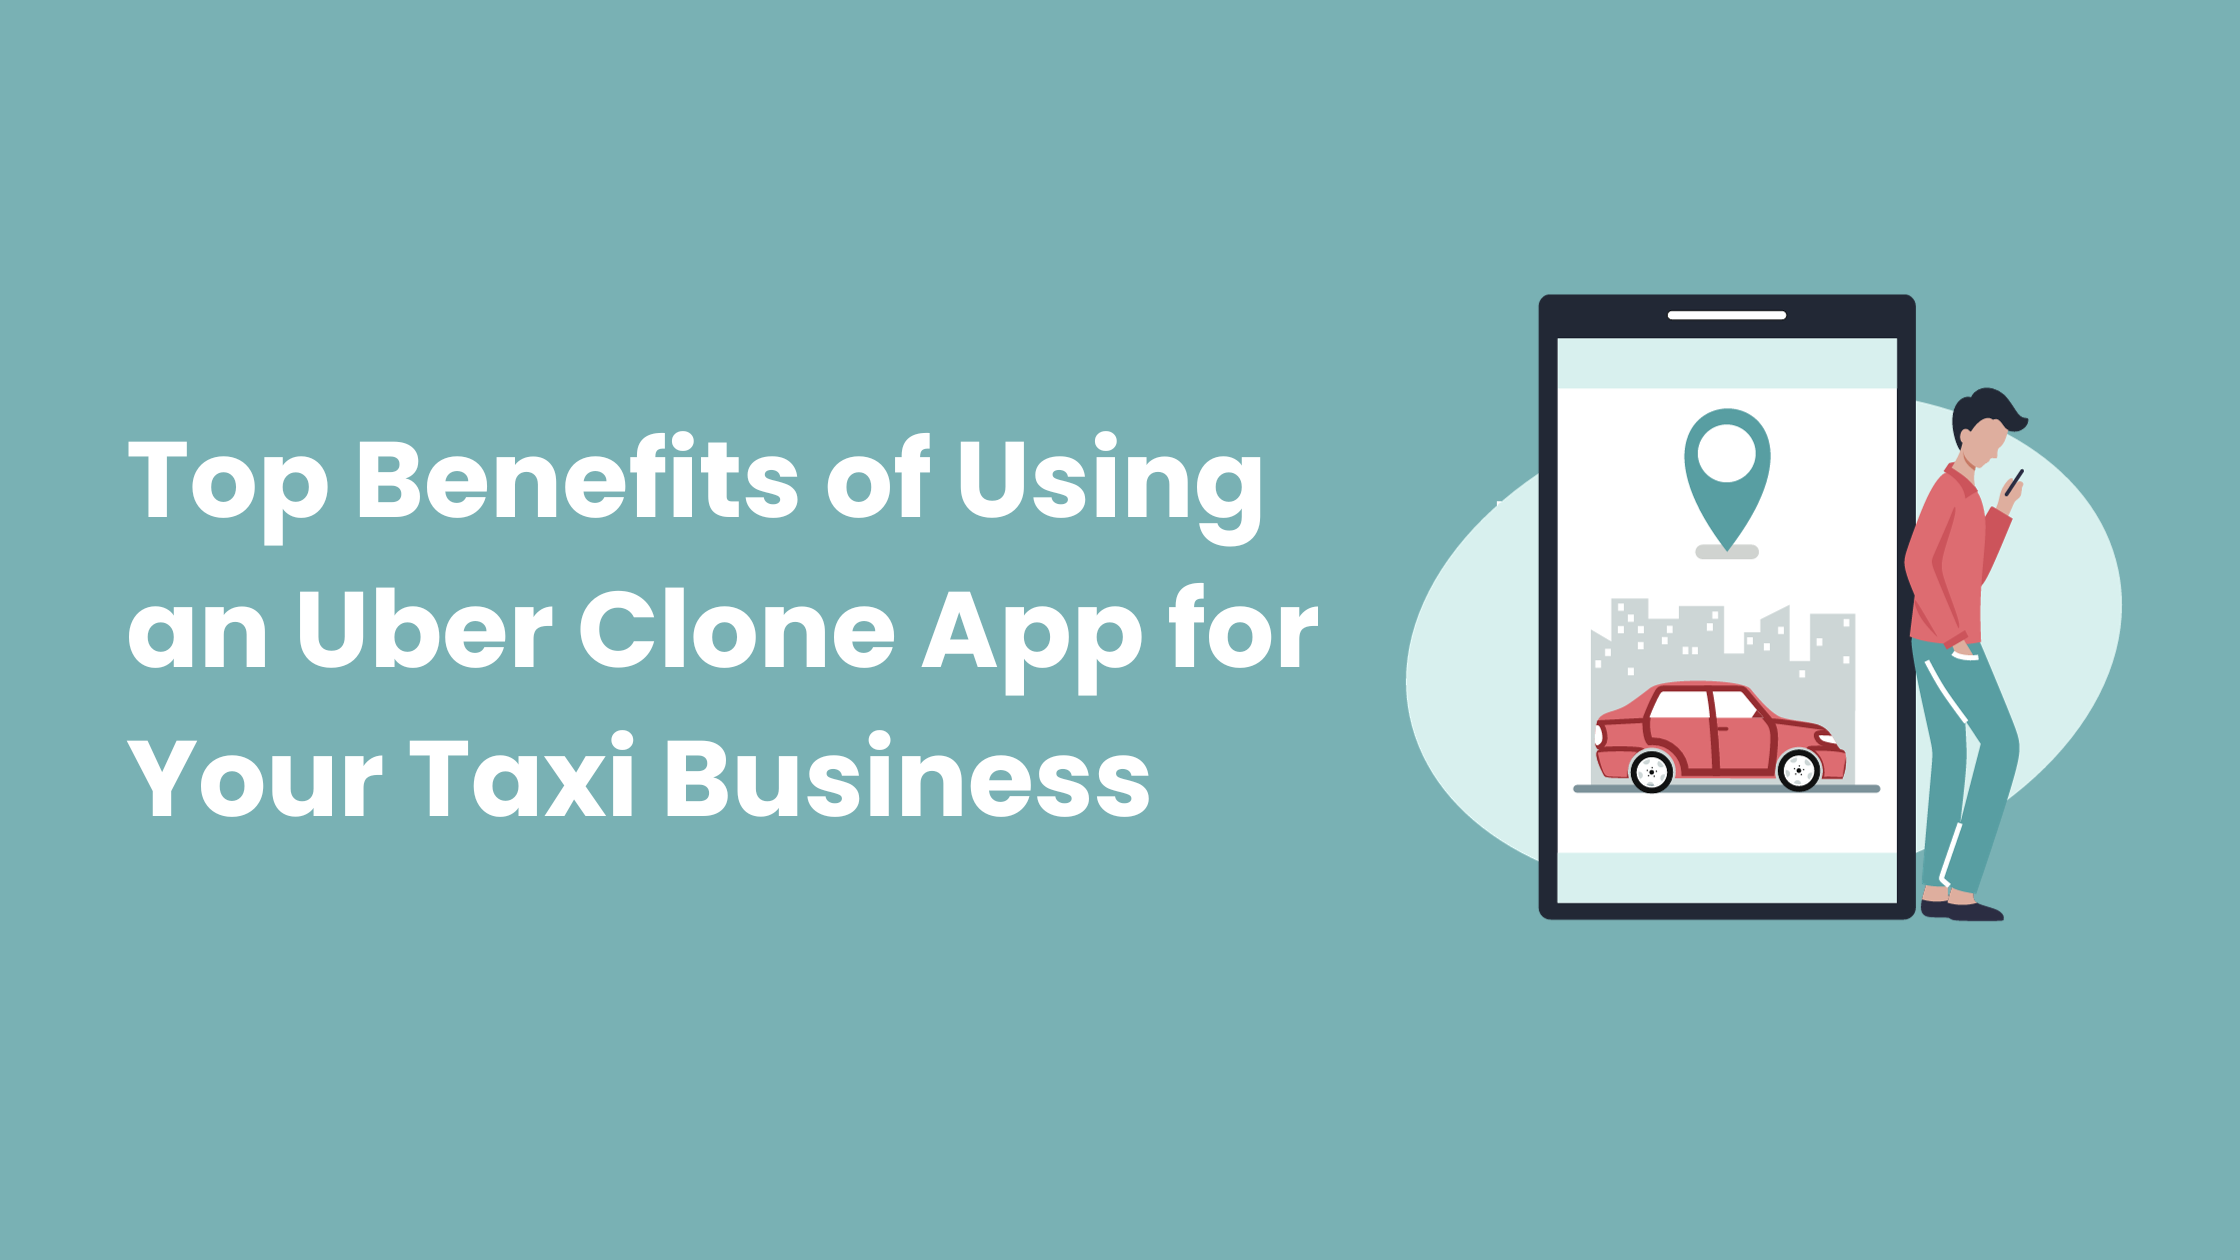 Top Benefits of Using an Uber Clone App for Your Taxi Business